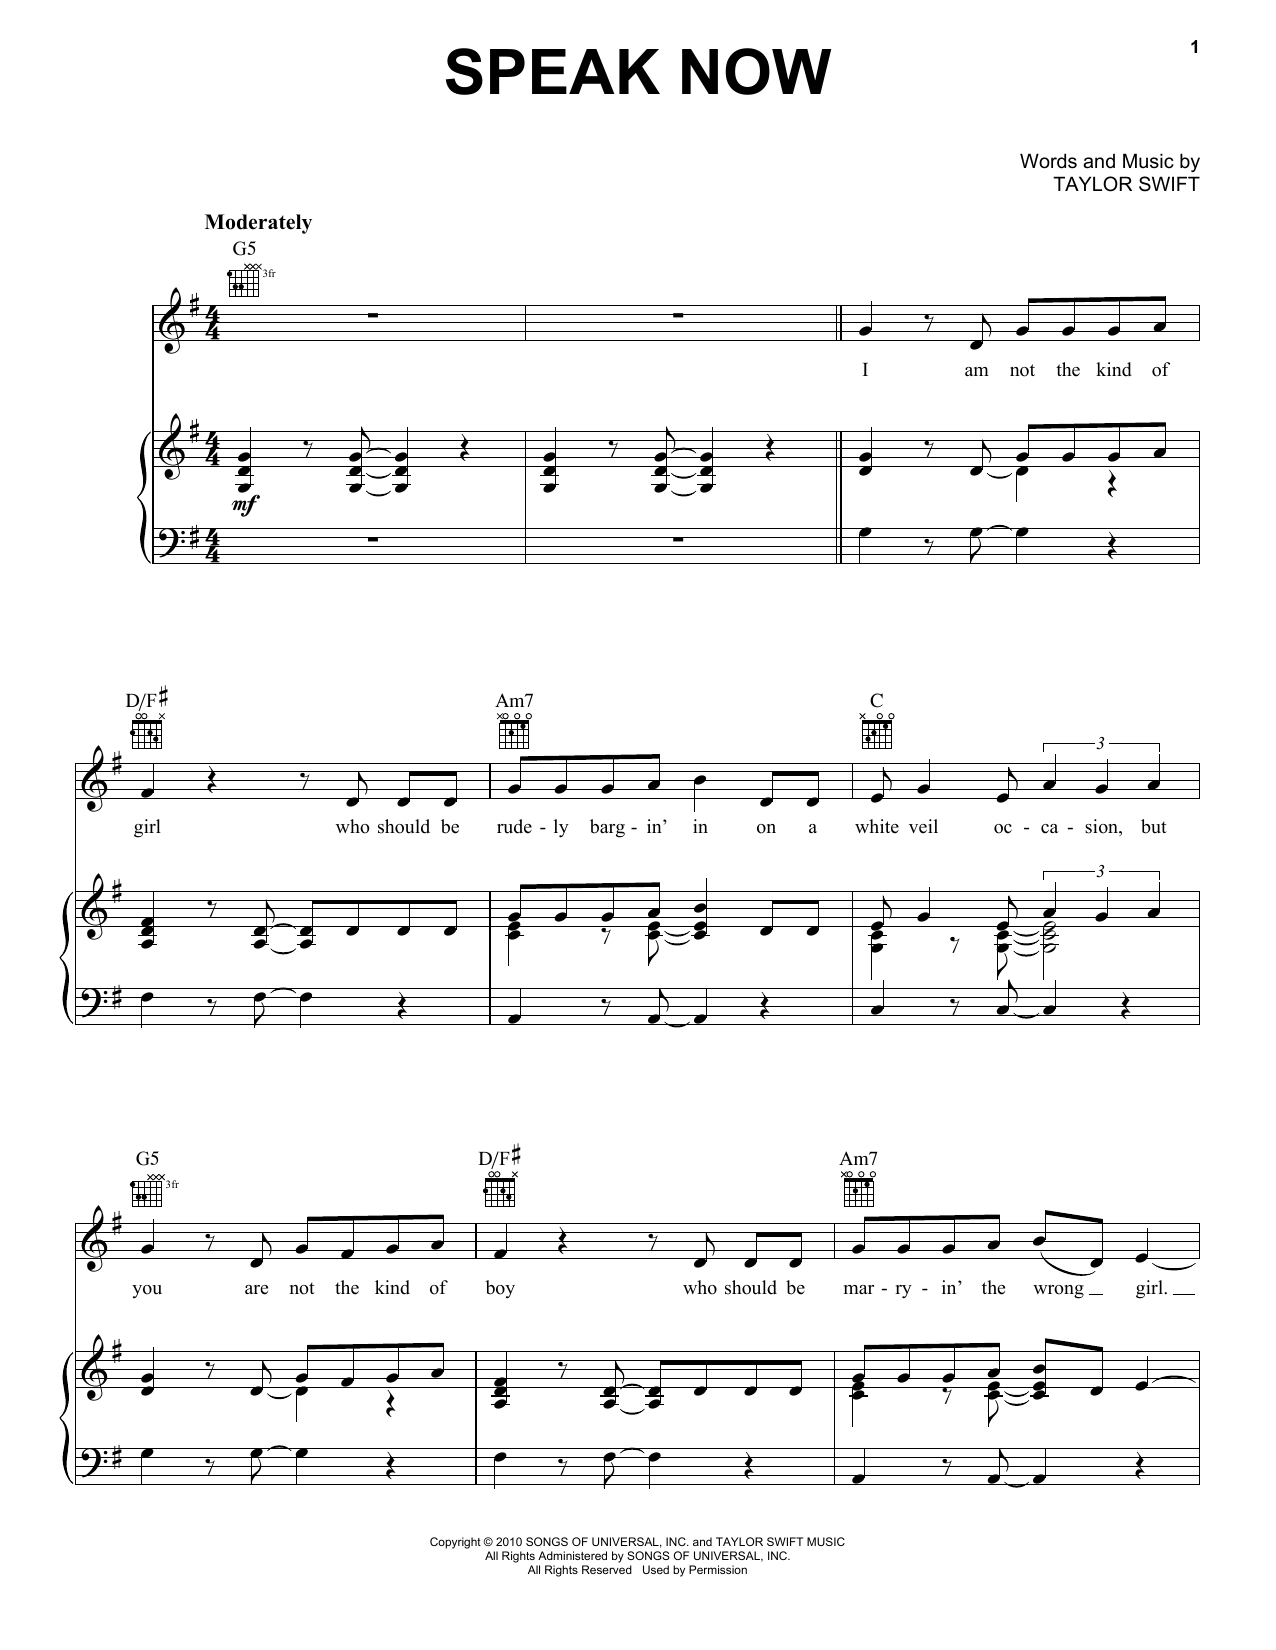 End Game" Sheet Music by Taylor Swift for Easy Guitar Tab/Vocal -  Sheet Music Now